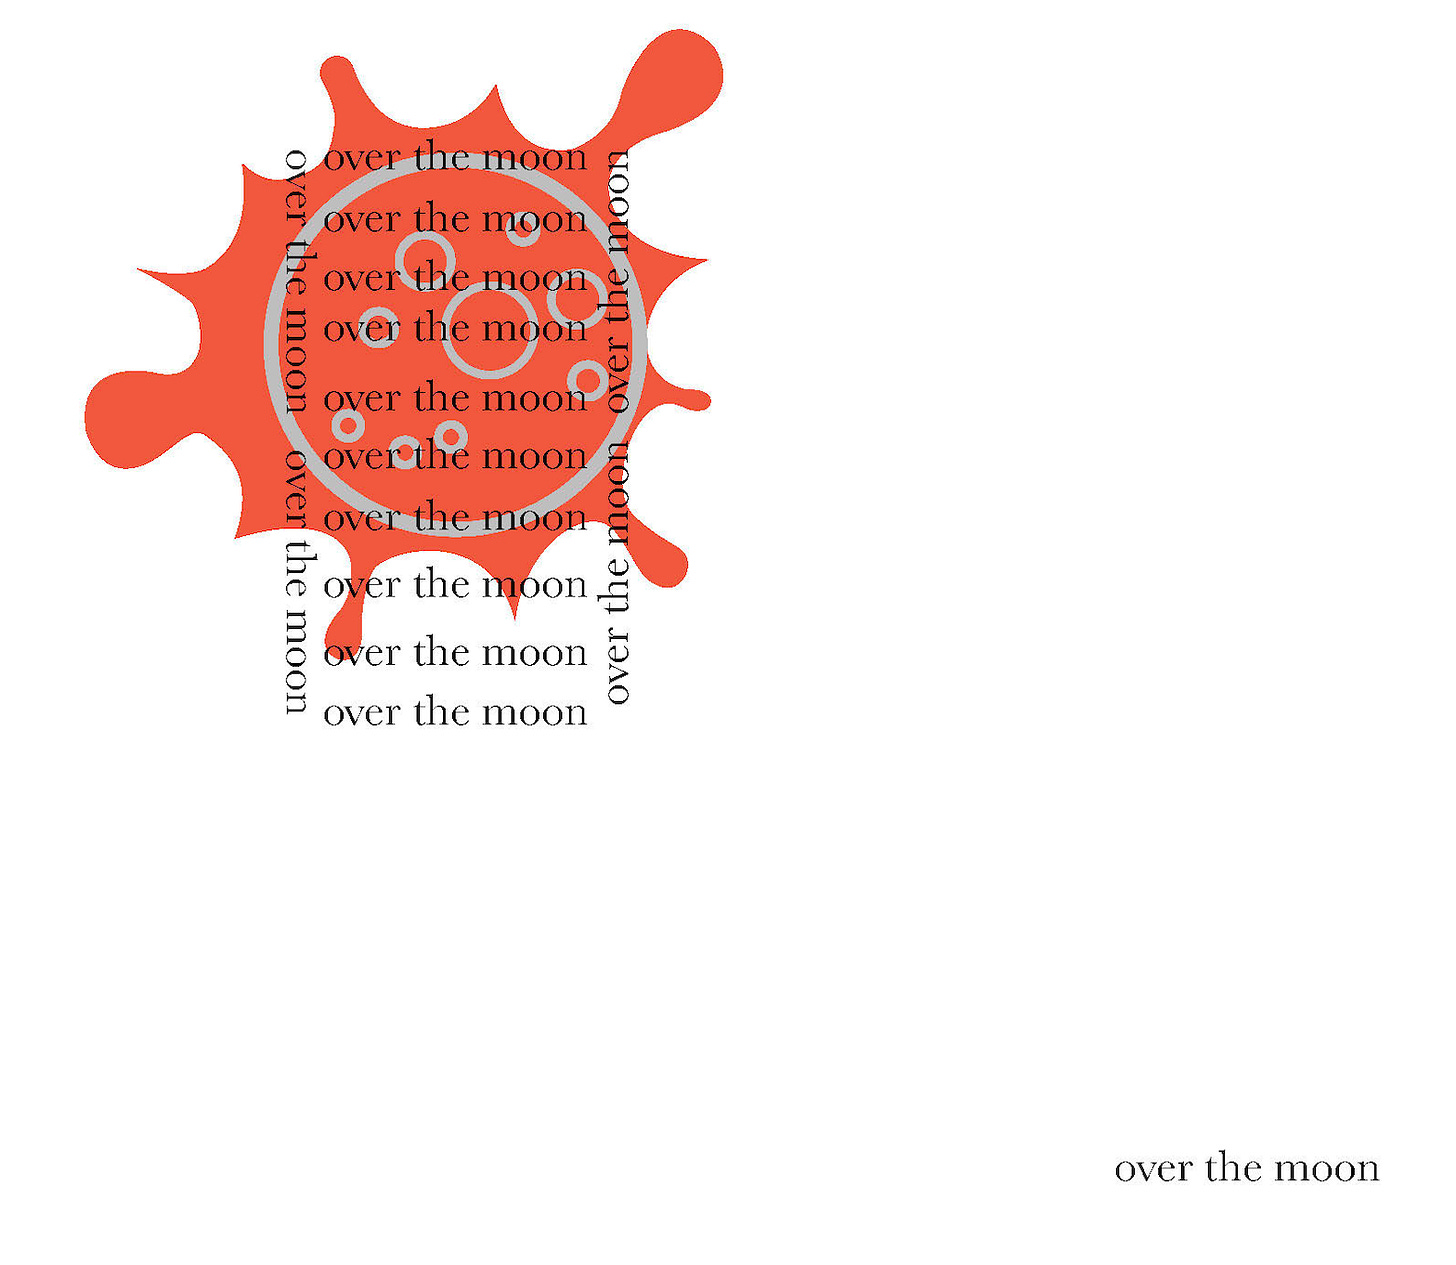 an image poem with text. a red splotch in the upper left of the page encloses a simple drawing of a gray moon. superimposed on this is an arrangement of text in the form of a ladder or bookcase, composed of the phrase “over the moon” in various vertical and horizontal orientations. a lone “over the moon” sits in the lower right corner of the page.